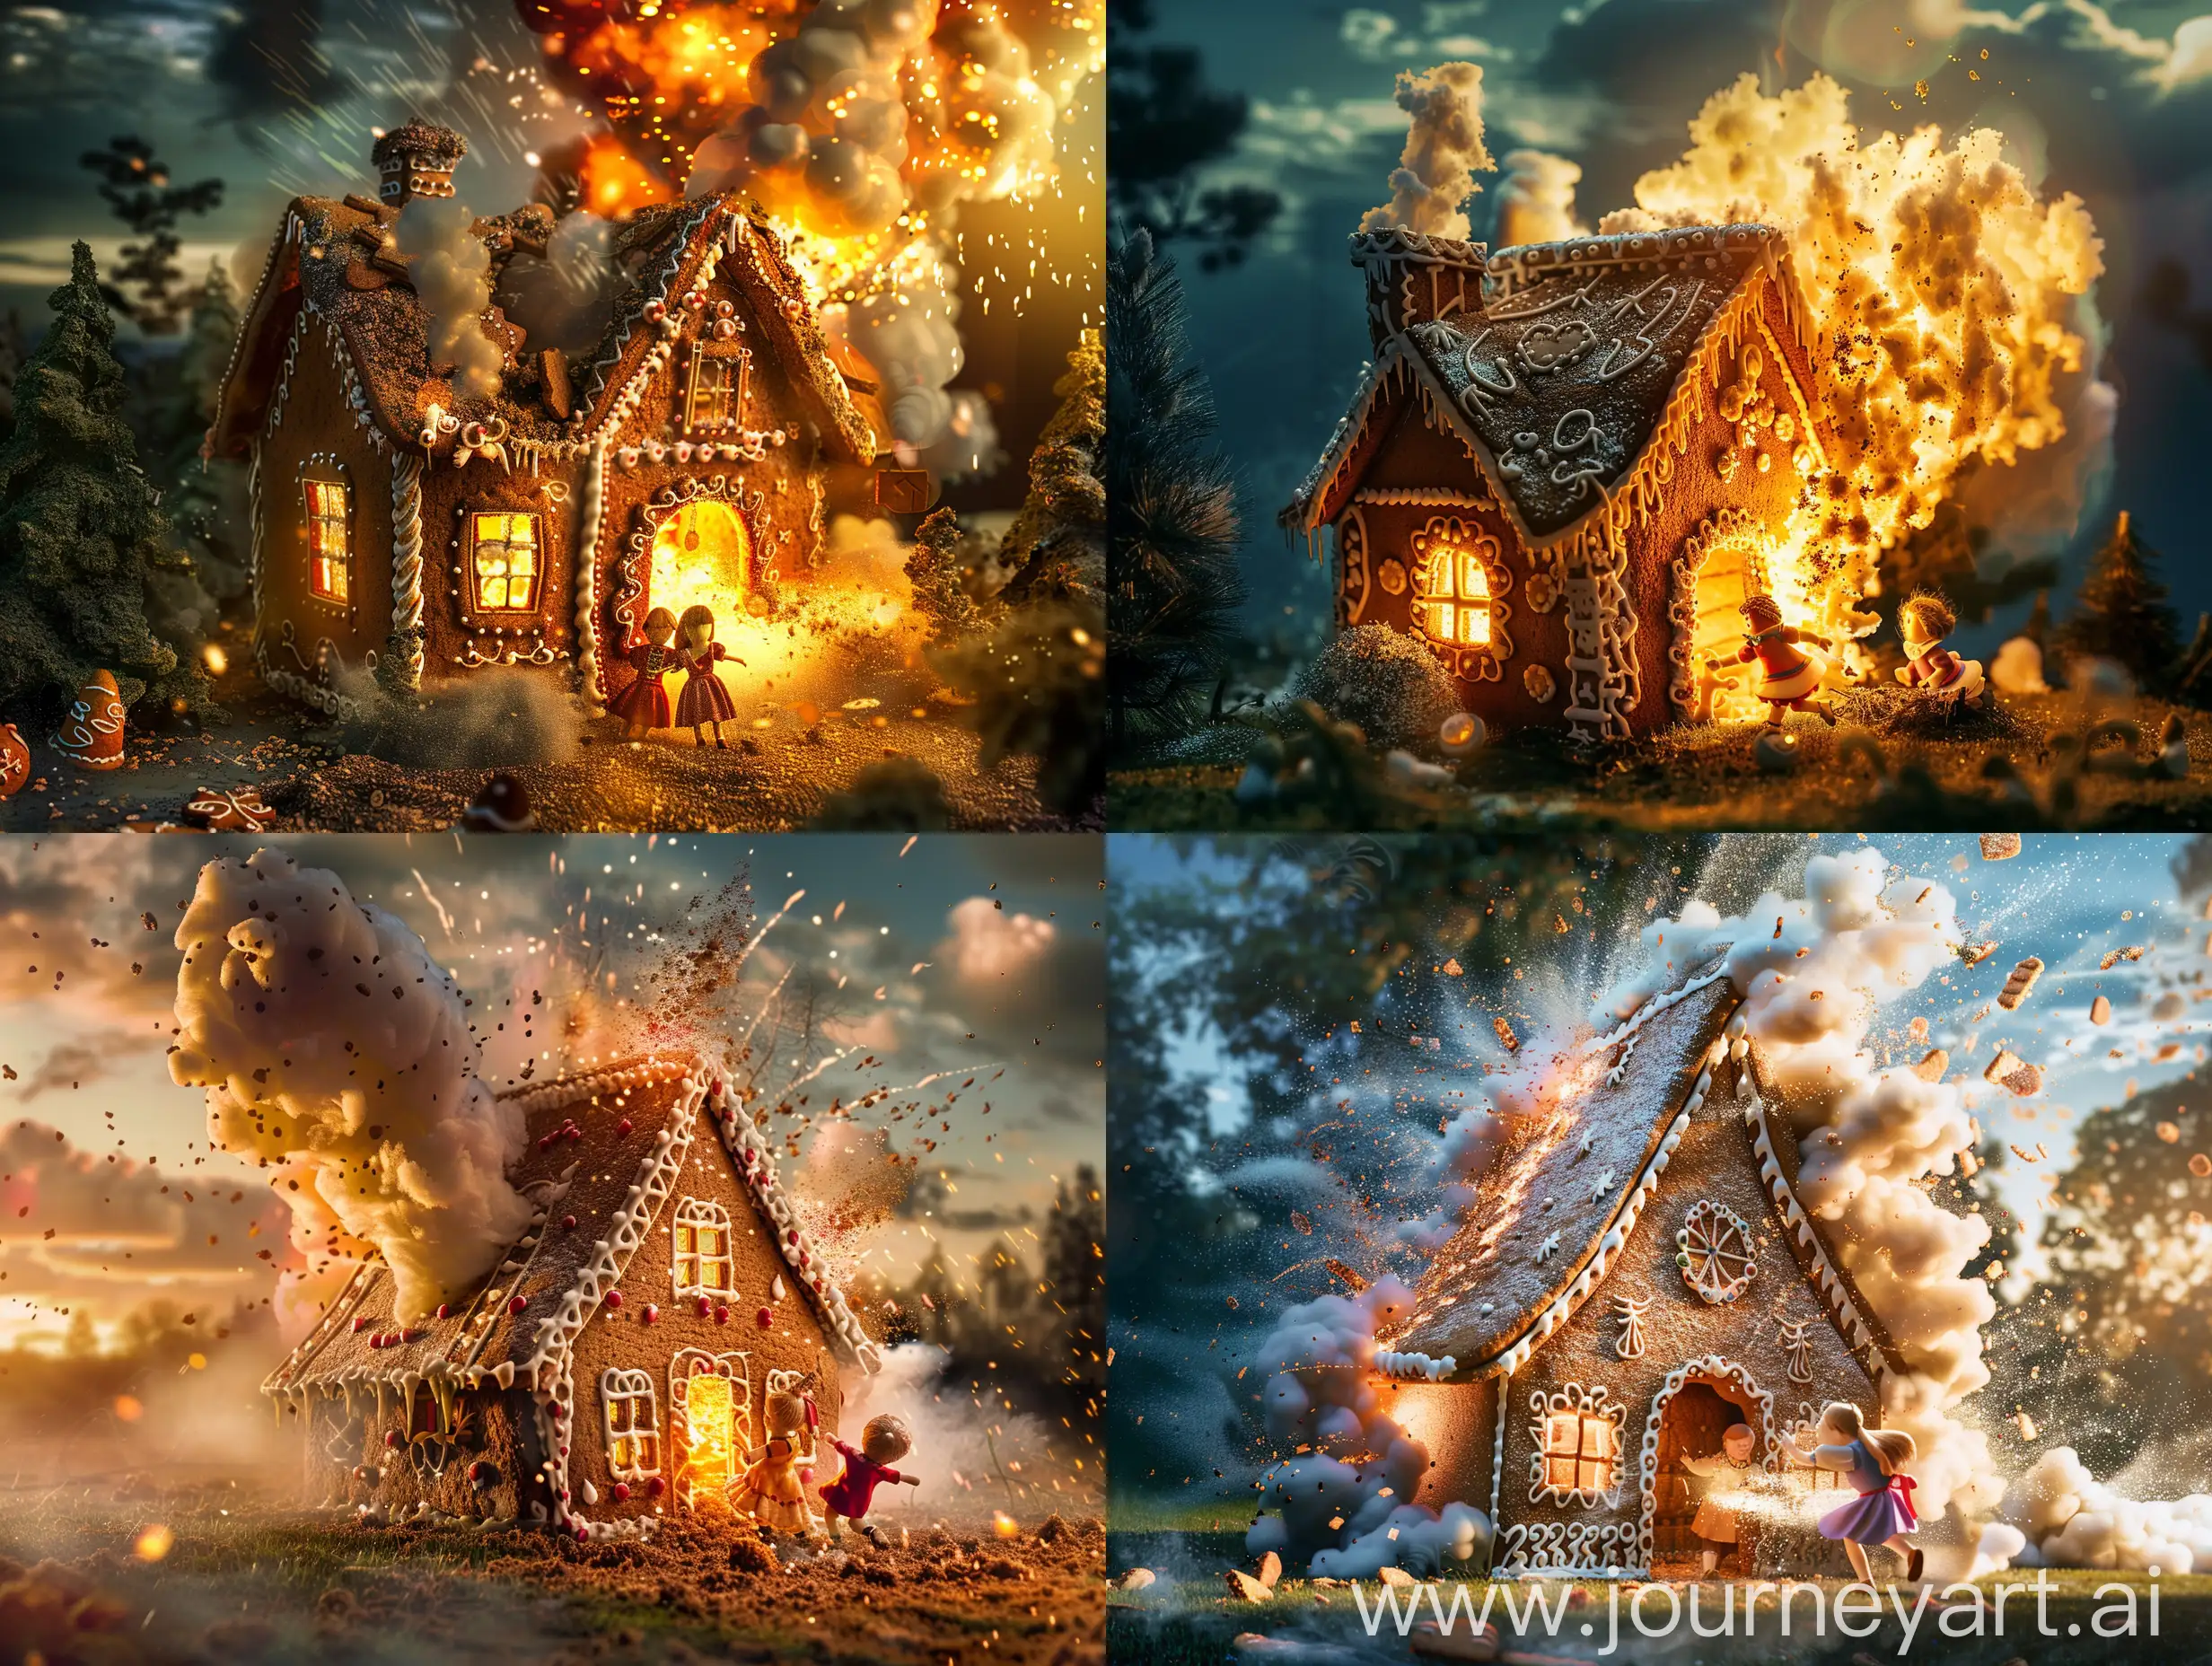 Classic-Evening-Scene-Hansel-and-Gretel-Emerging-from-Exploded-Gingerbread-House